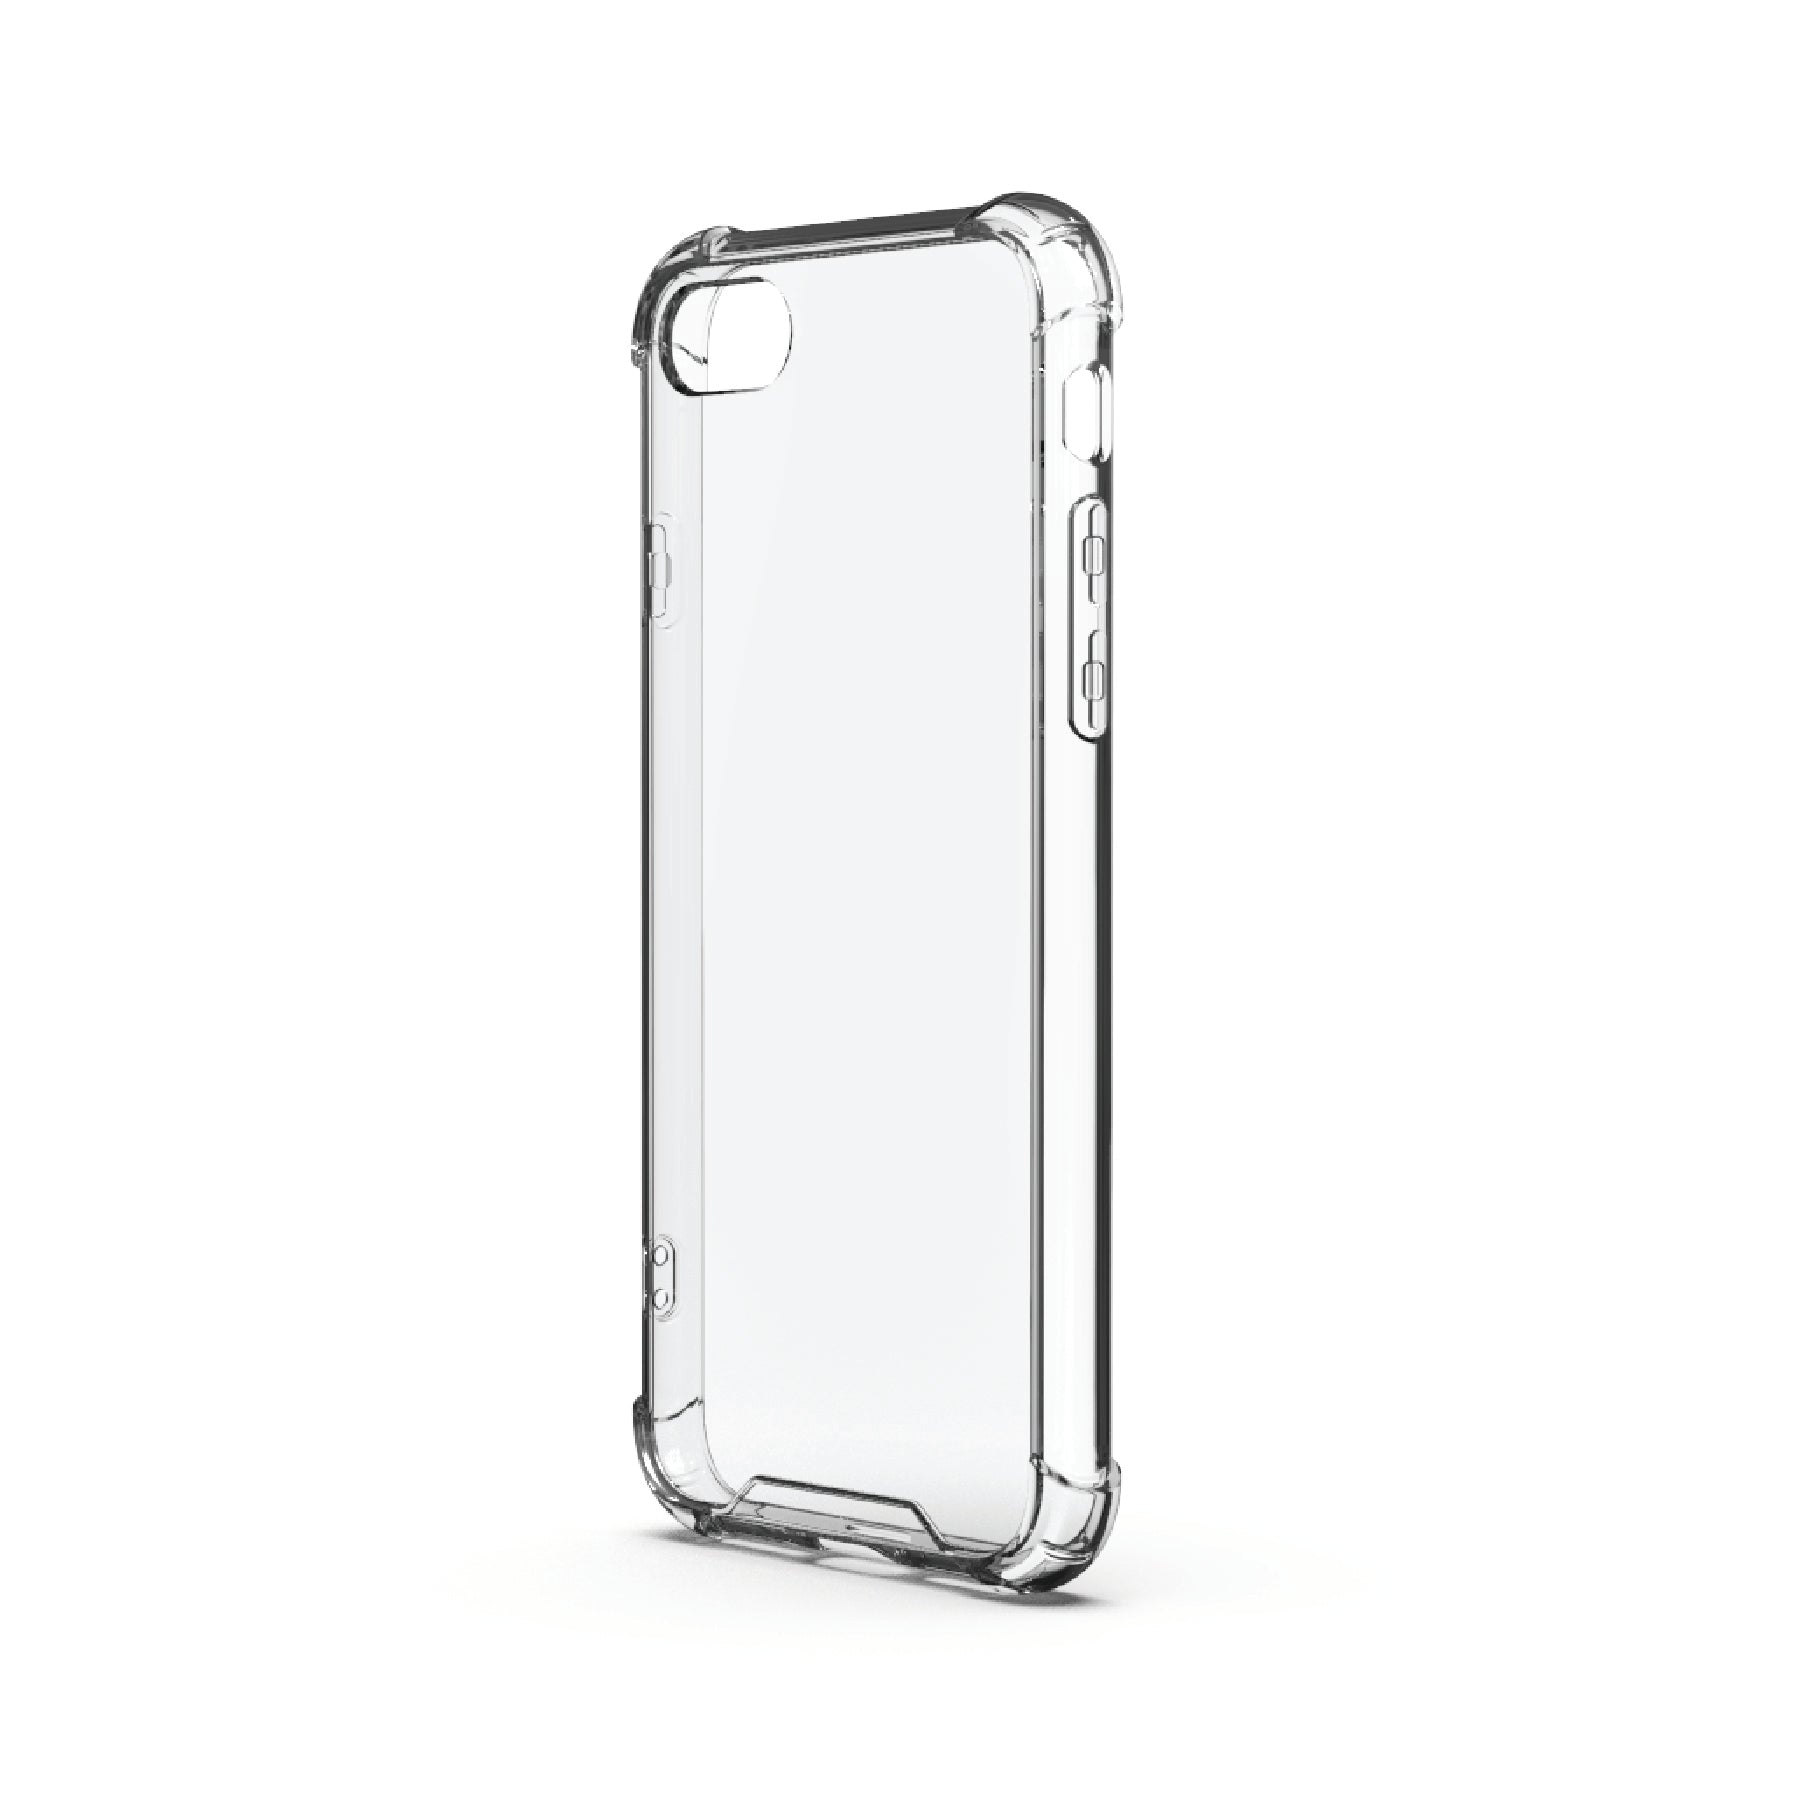 MOOV Crystal Clear Case for iPhone SE/8/7 (New) - iStore Pre-owned